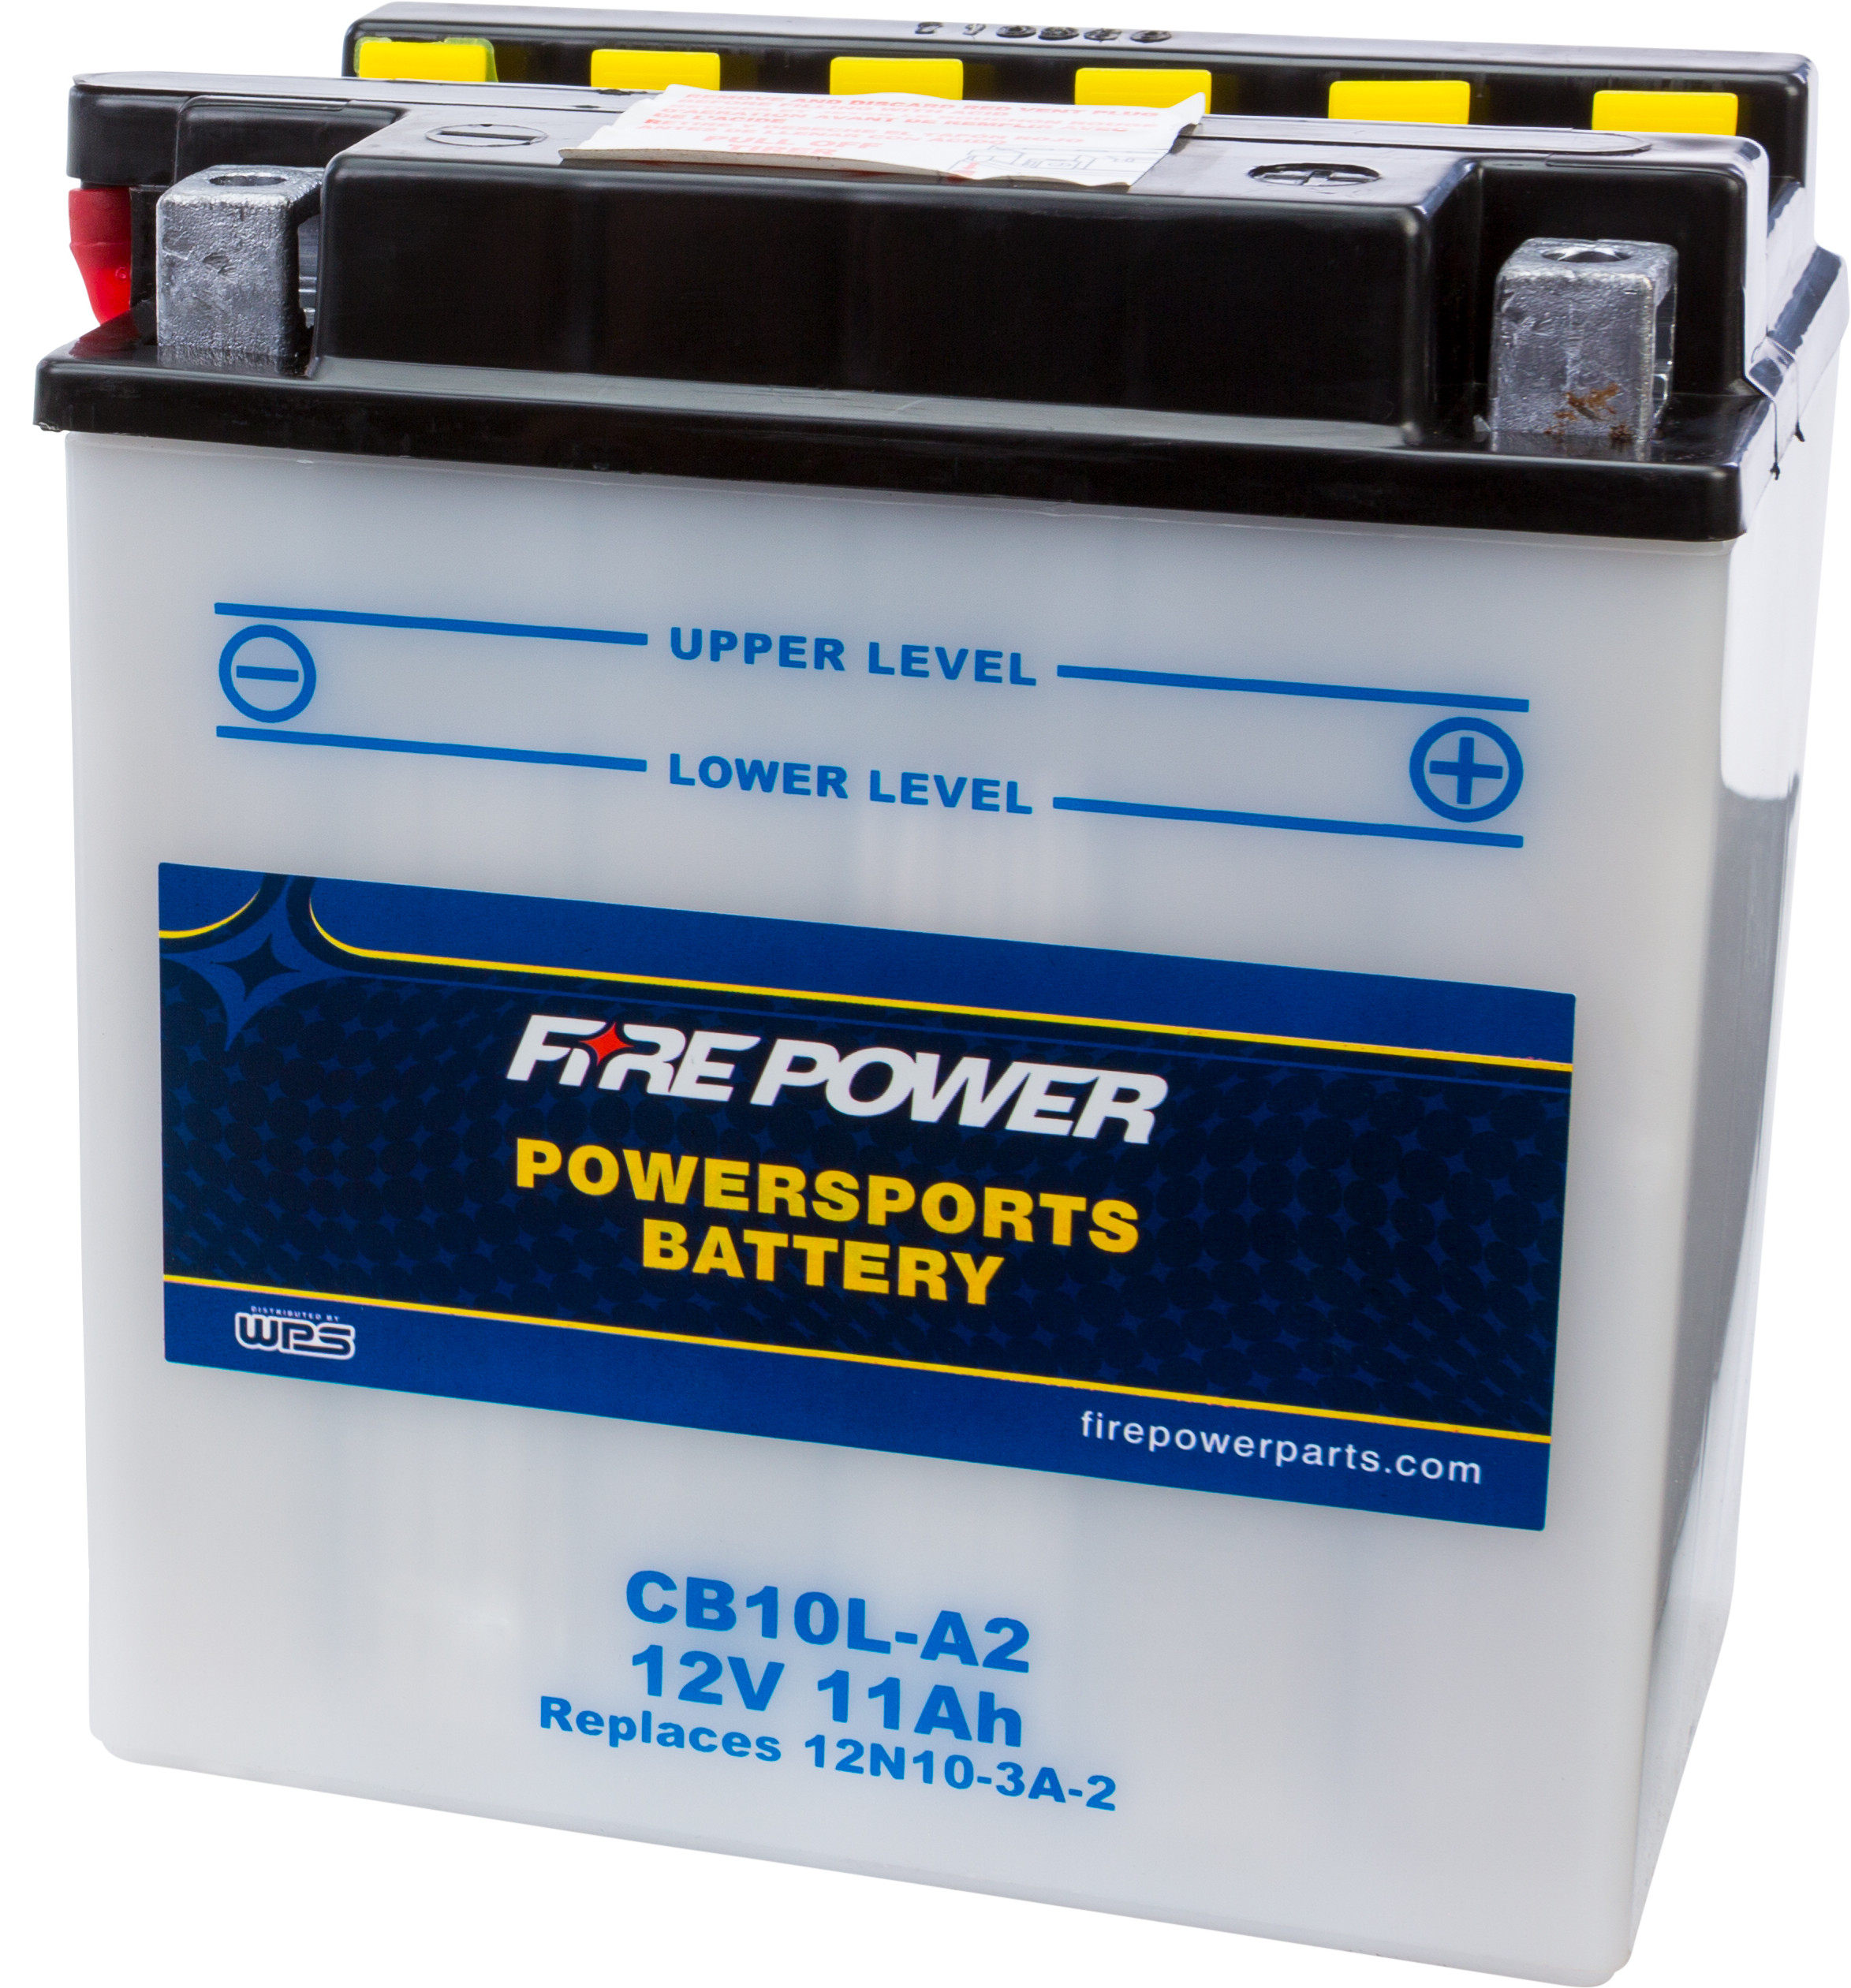 12V Heavy Duty Battery - Replaces YB10L-A2 - Click Image to Close